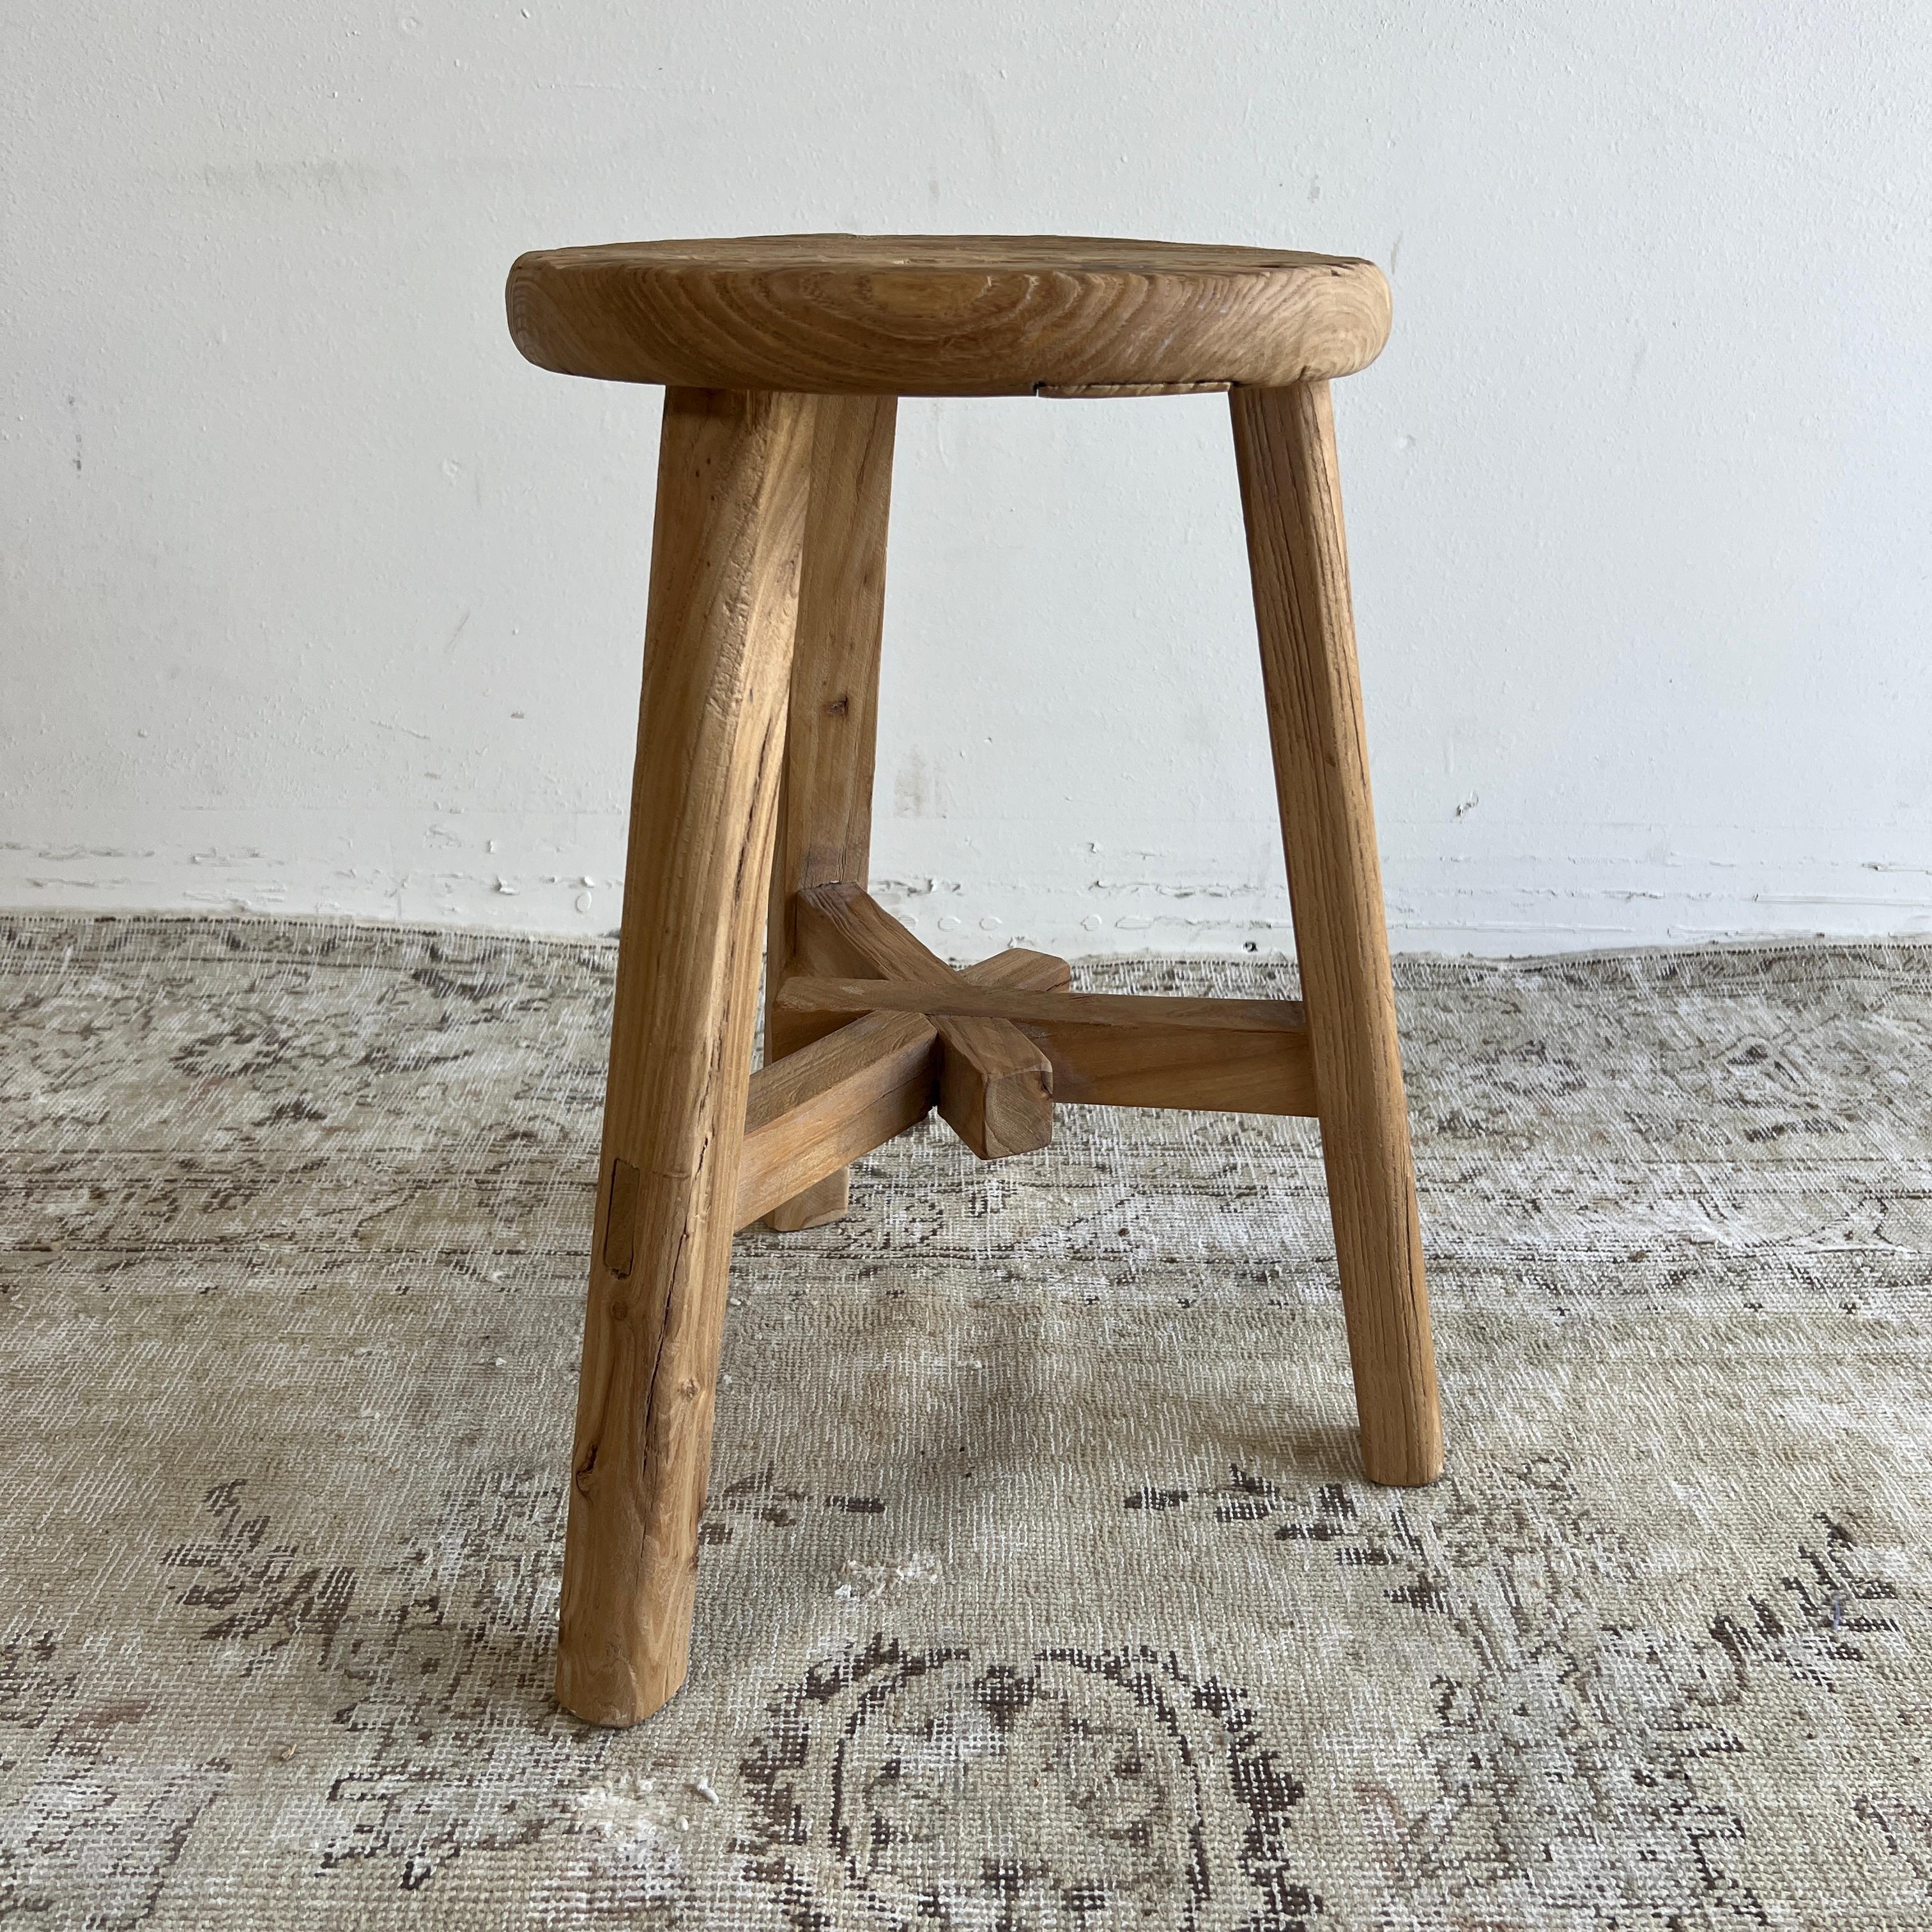 Vintage antique elmwood stool
These are the real vintage antique elmwood stools! Beautiful antique patina, with weathering and age, these are solid and sturdy ready for daily use, use as a table, stool, drink table, they are great for any